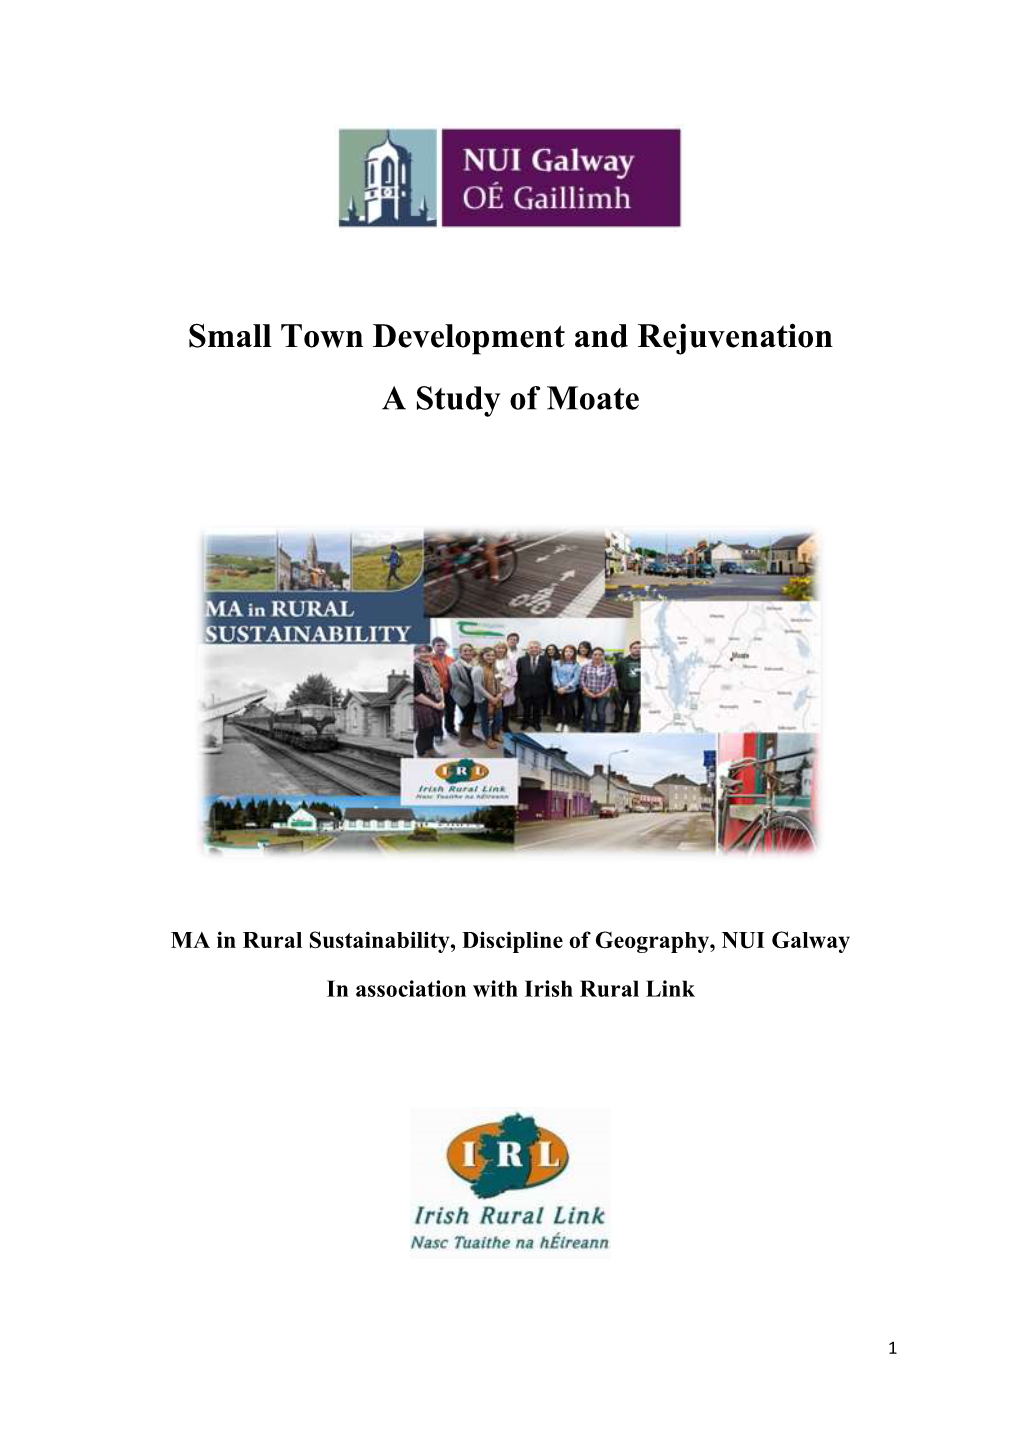 Small Town Development and Rejuvenation a Study of Moate